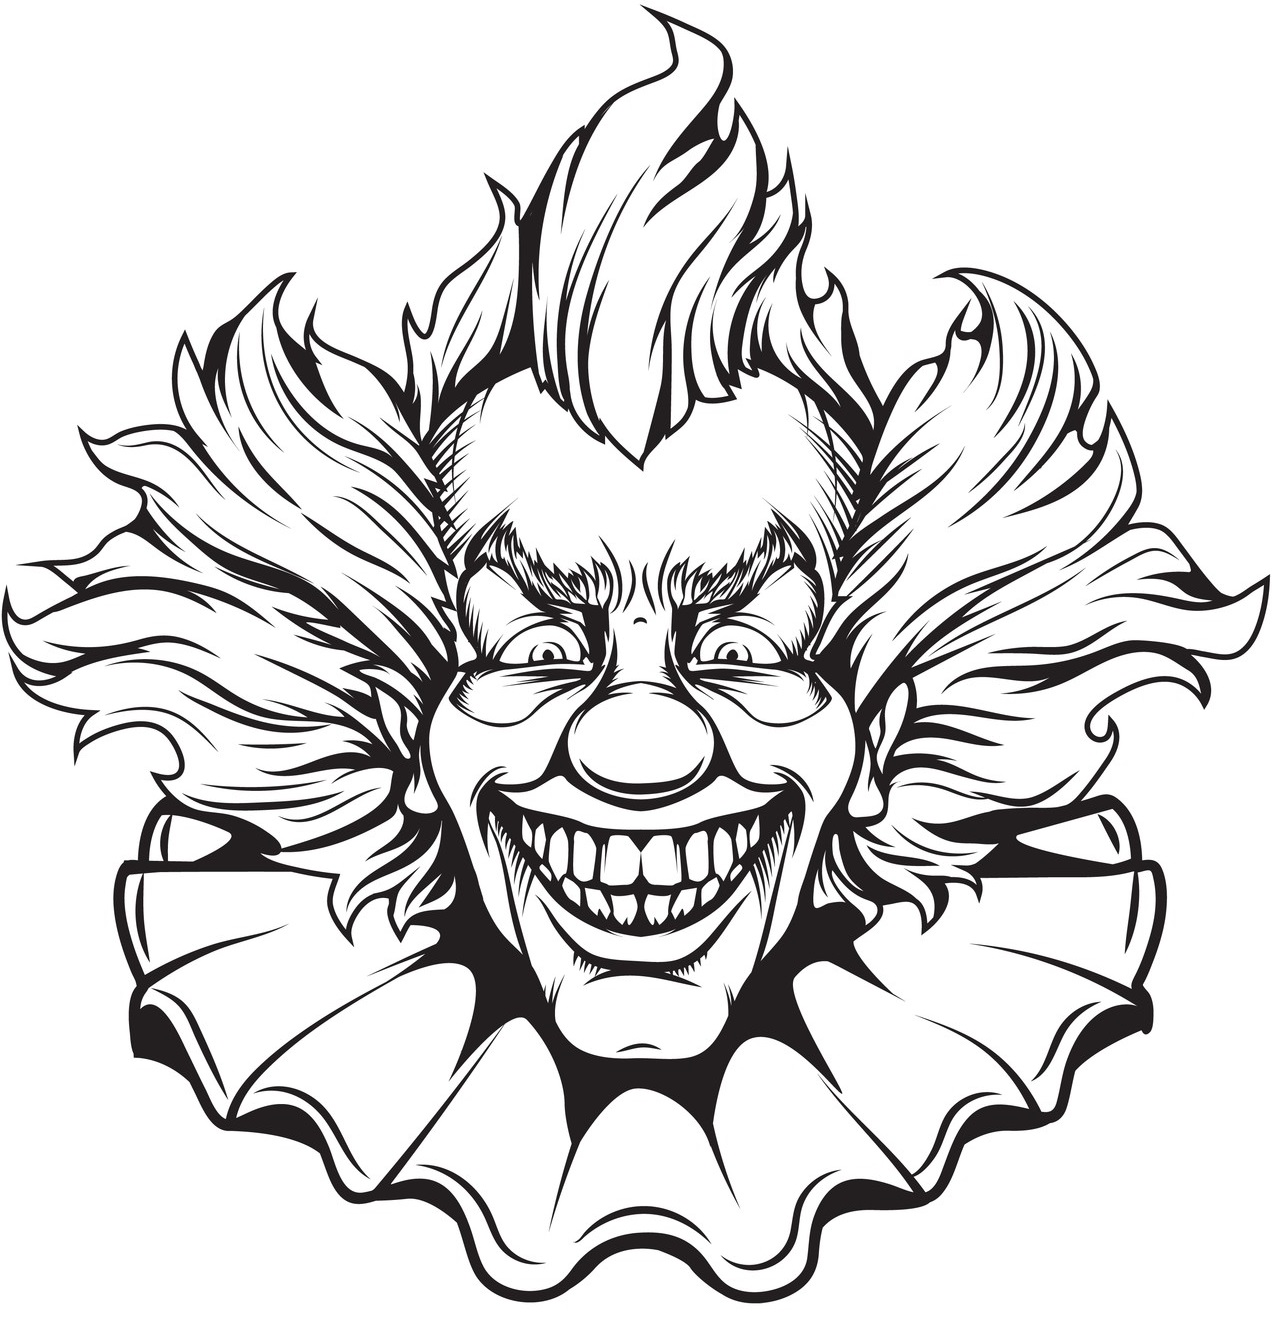 psycho-killer-clowns-coloring-book-for-kids-9-teenagers-home